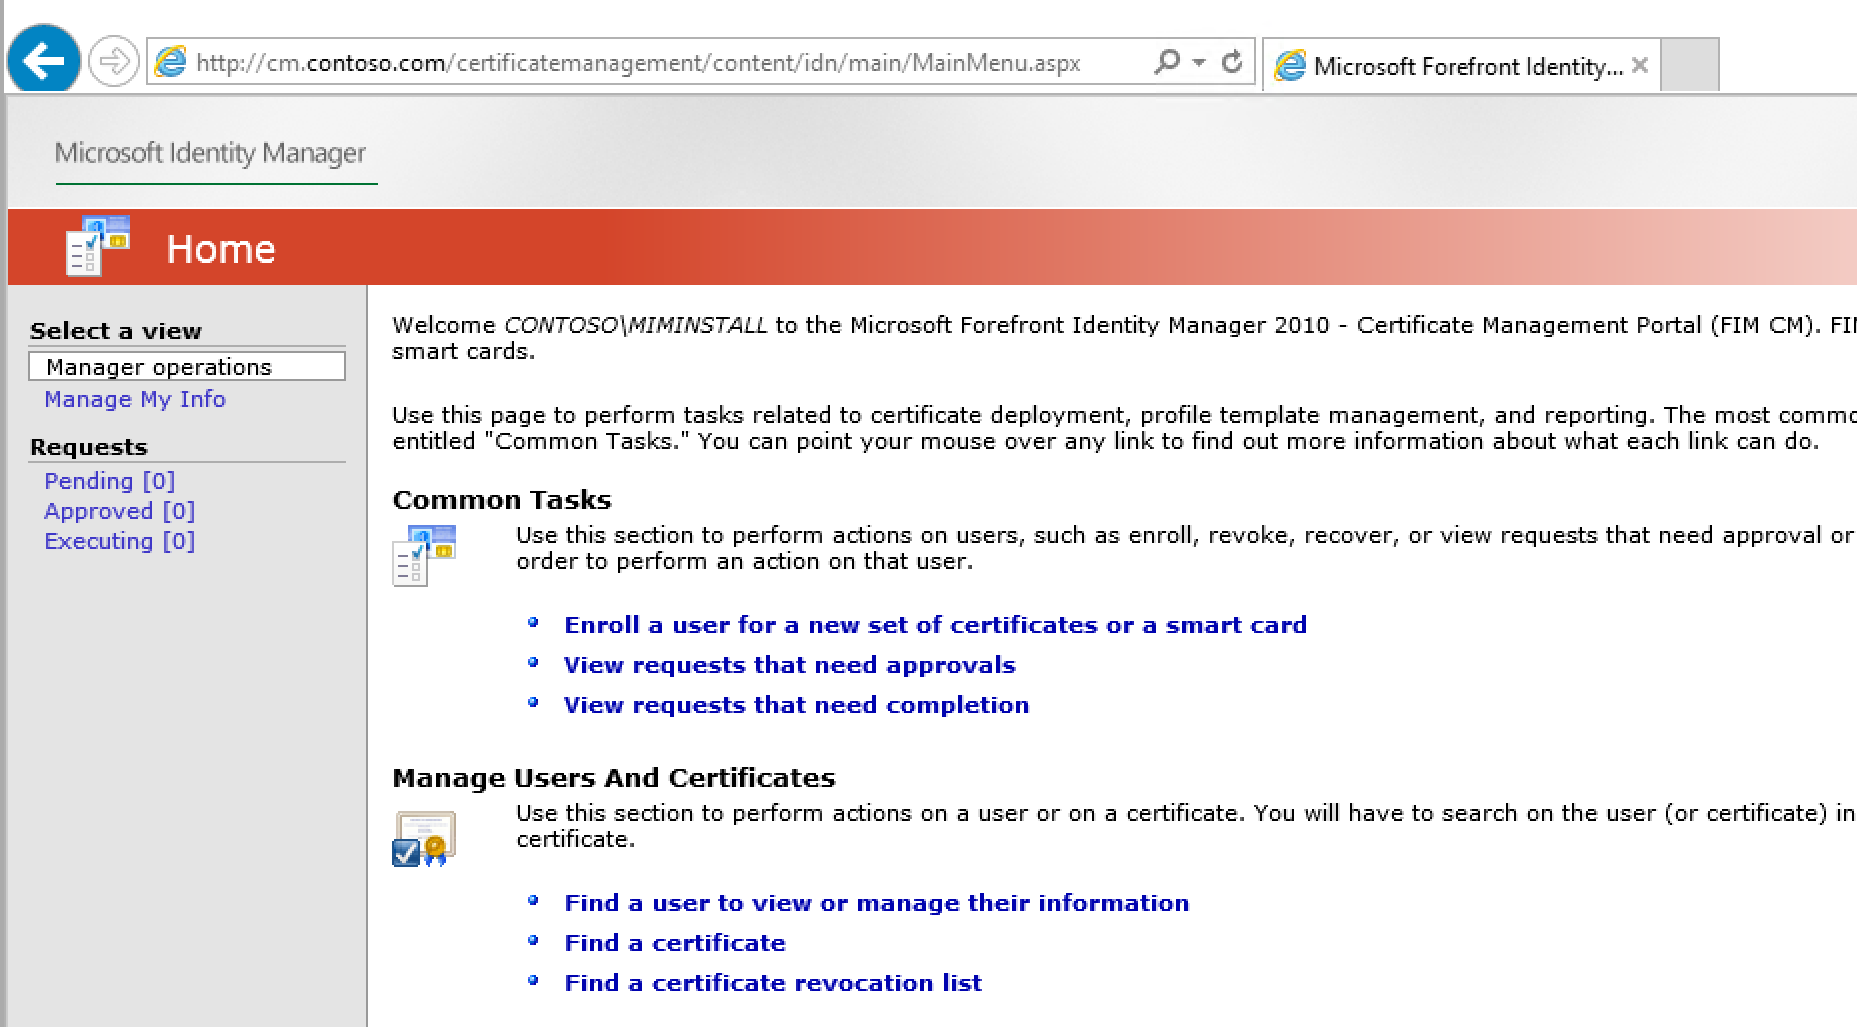 Screenshot showing the home page for the Microsoft Identity Manager Certificate Management Portal.